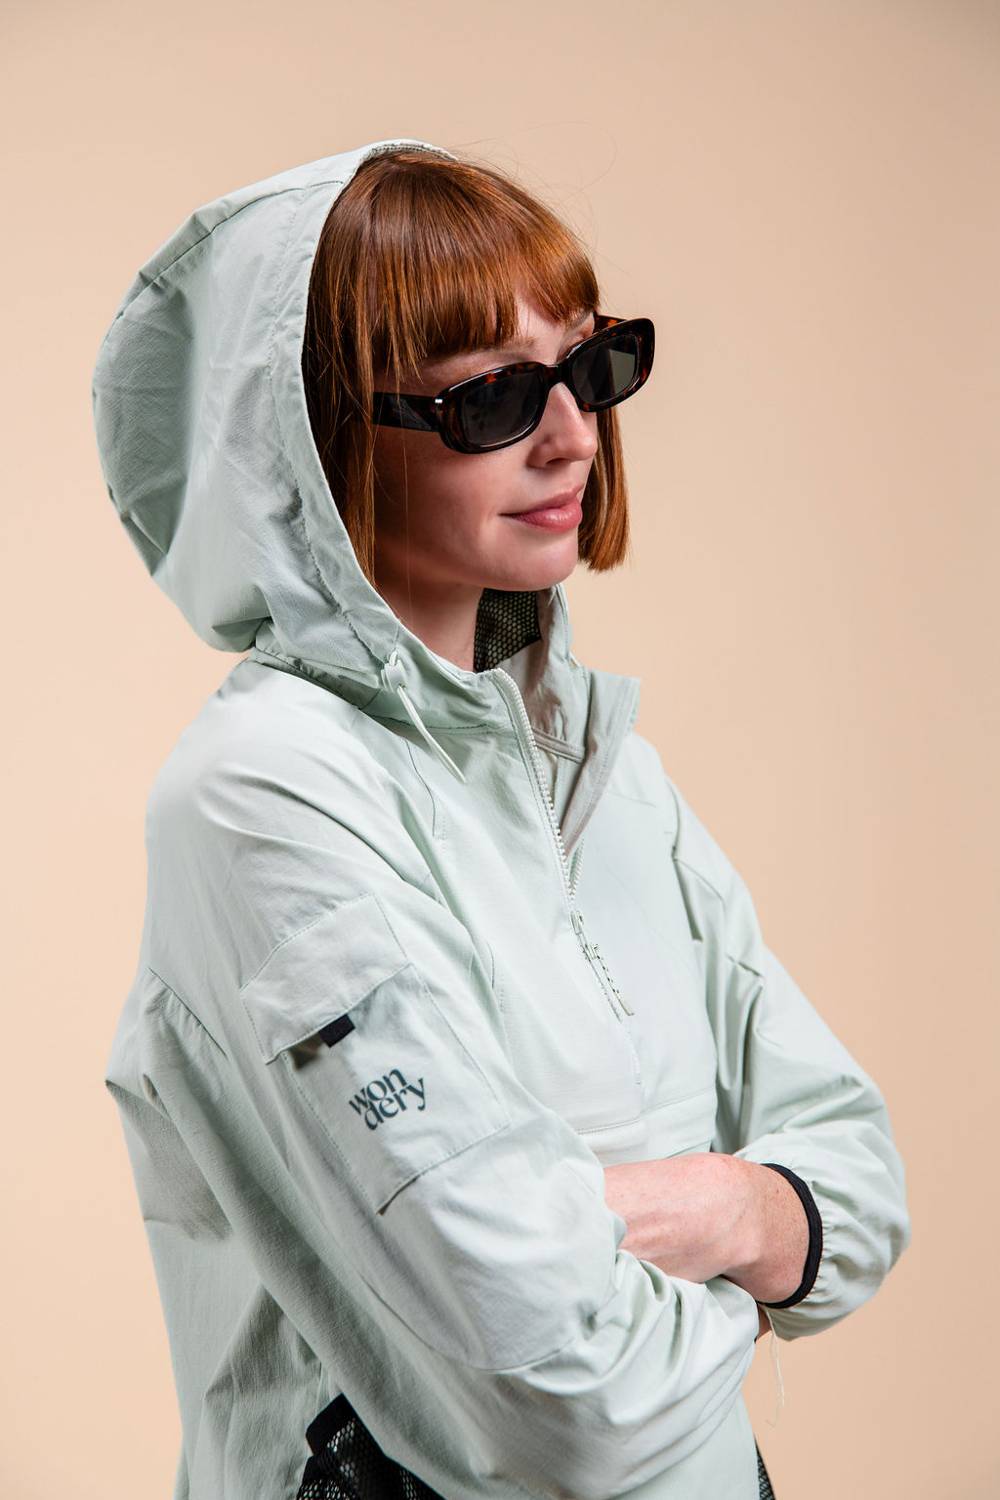 Red head woman with tortoise pattern sunglasses and lightweight green jacket hood over head